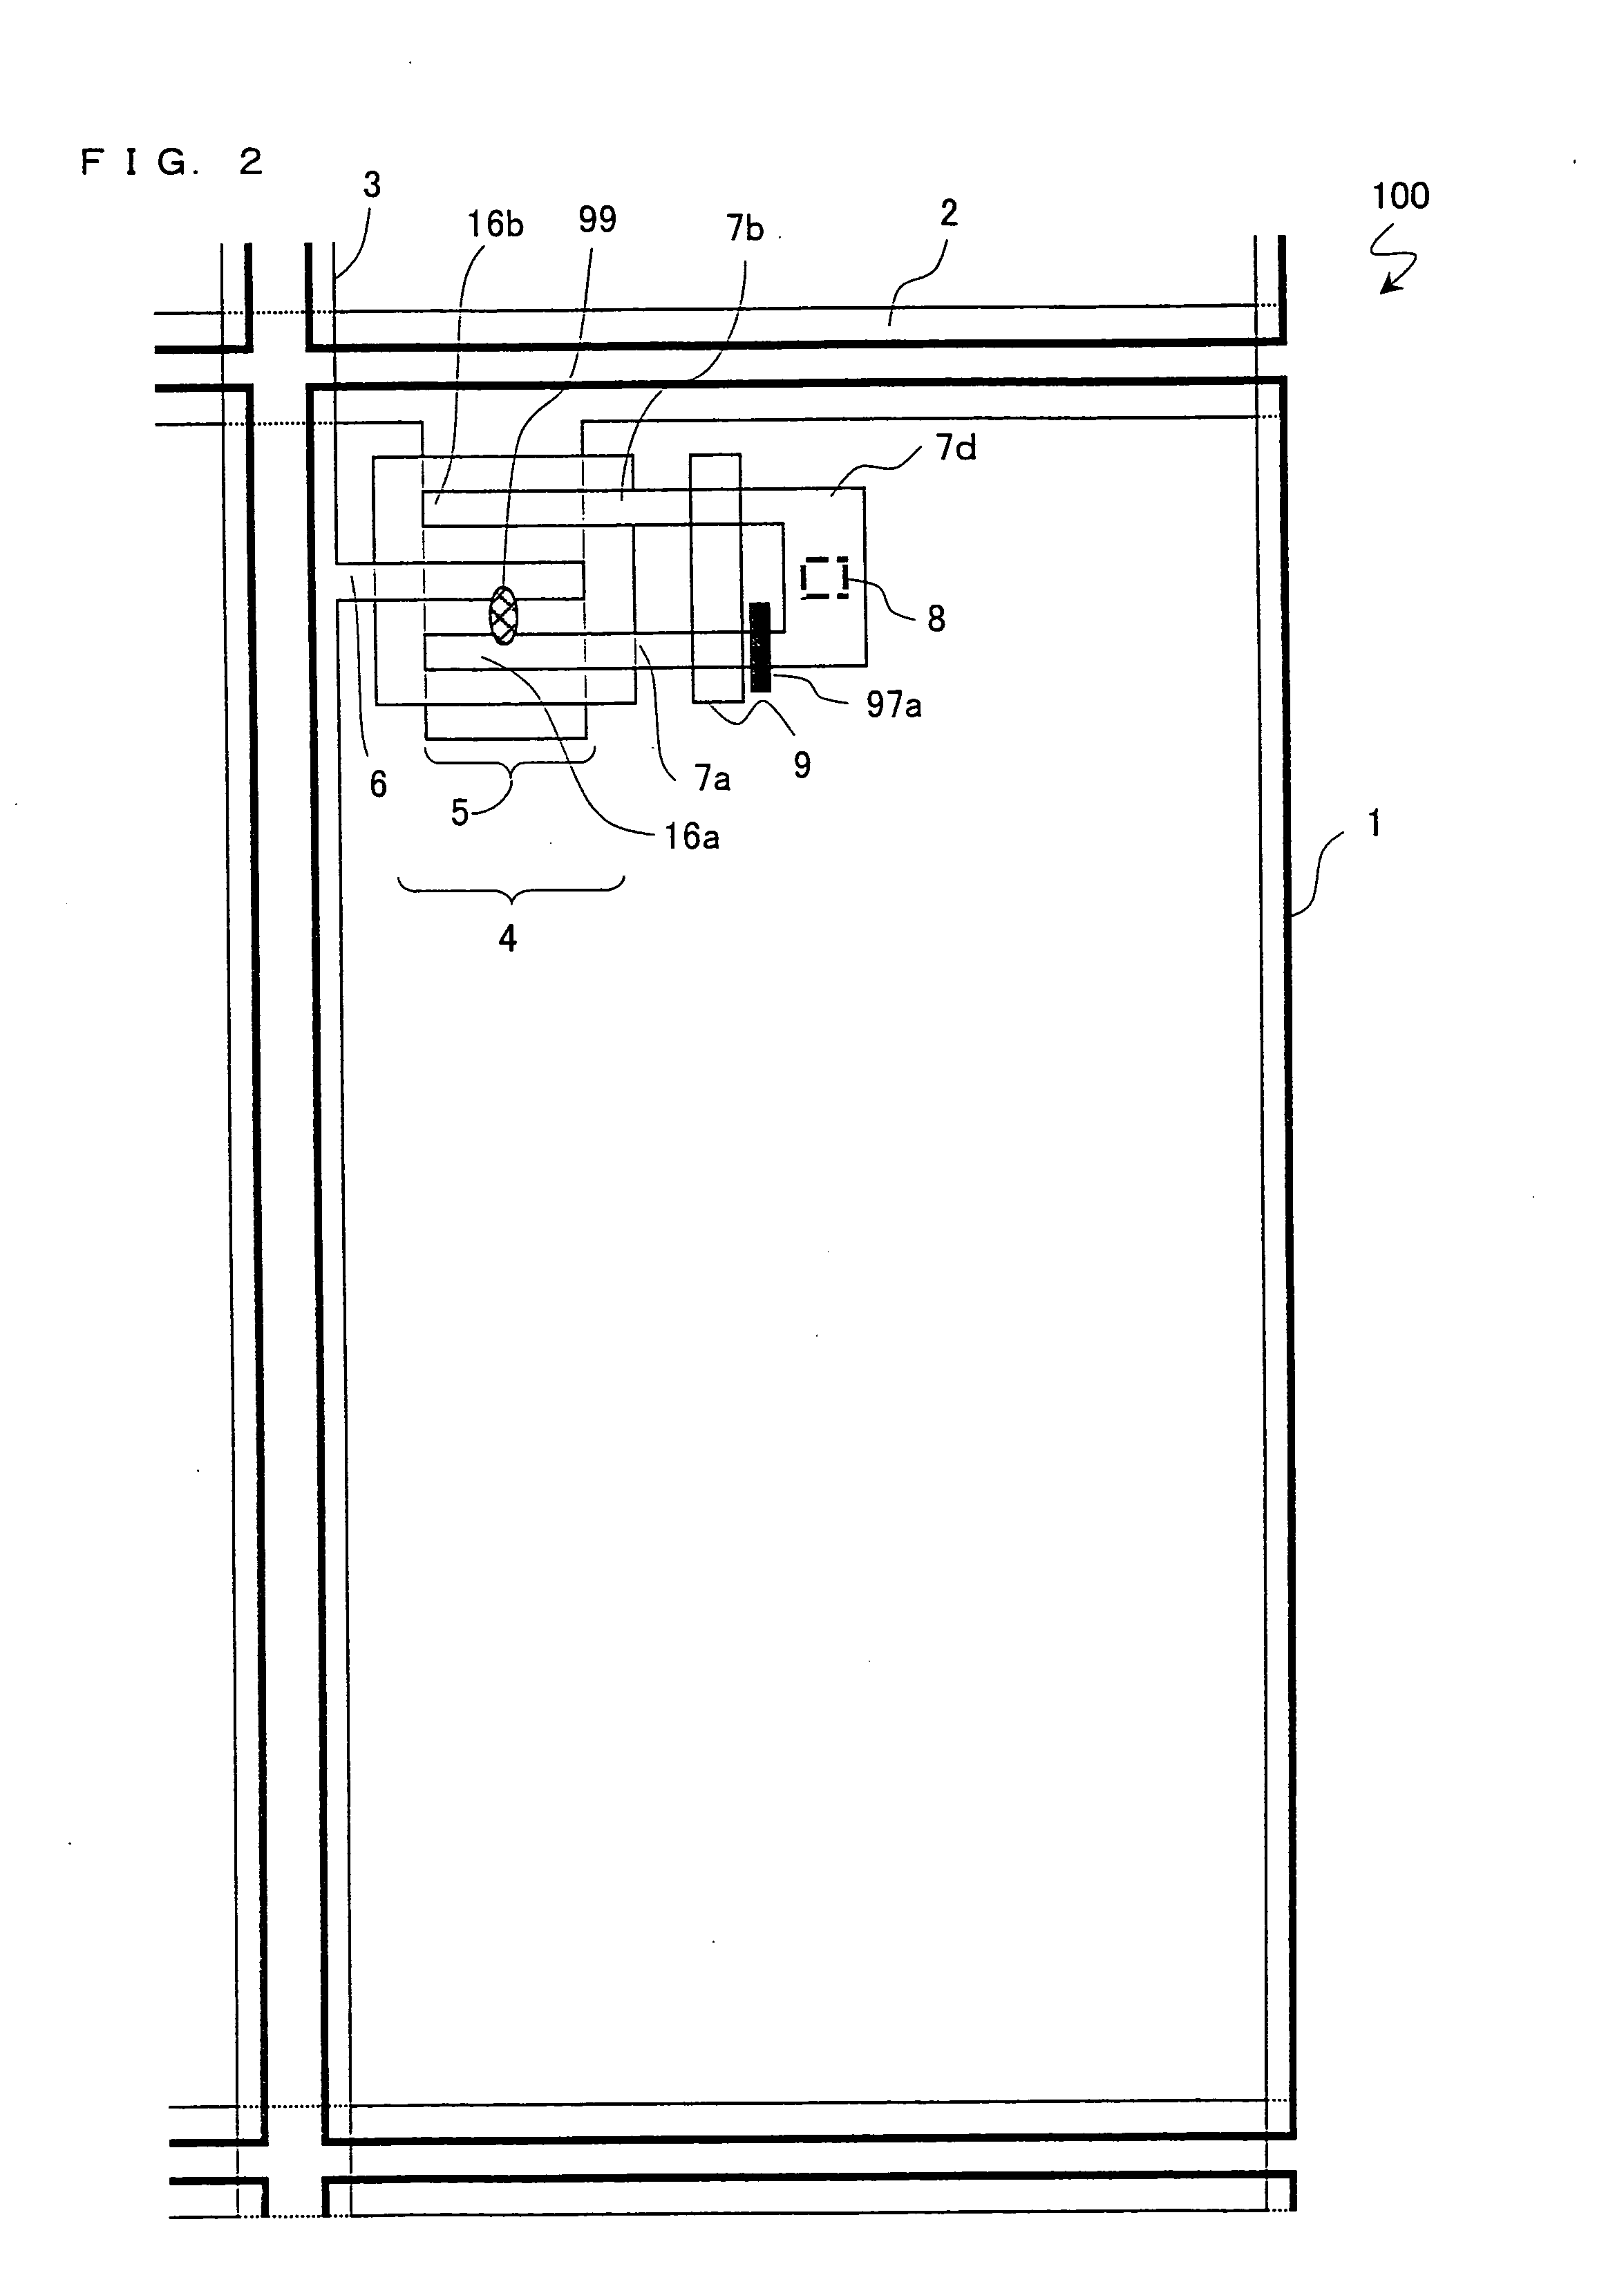 Active Matrix Substrate, Display Apparatus, and Pixel Deffect Correction Method